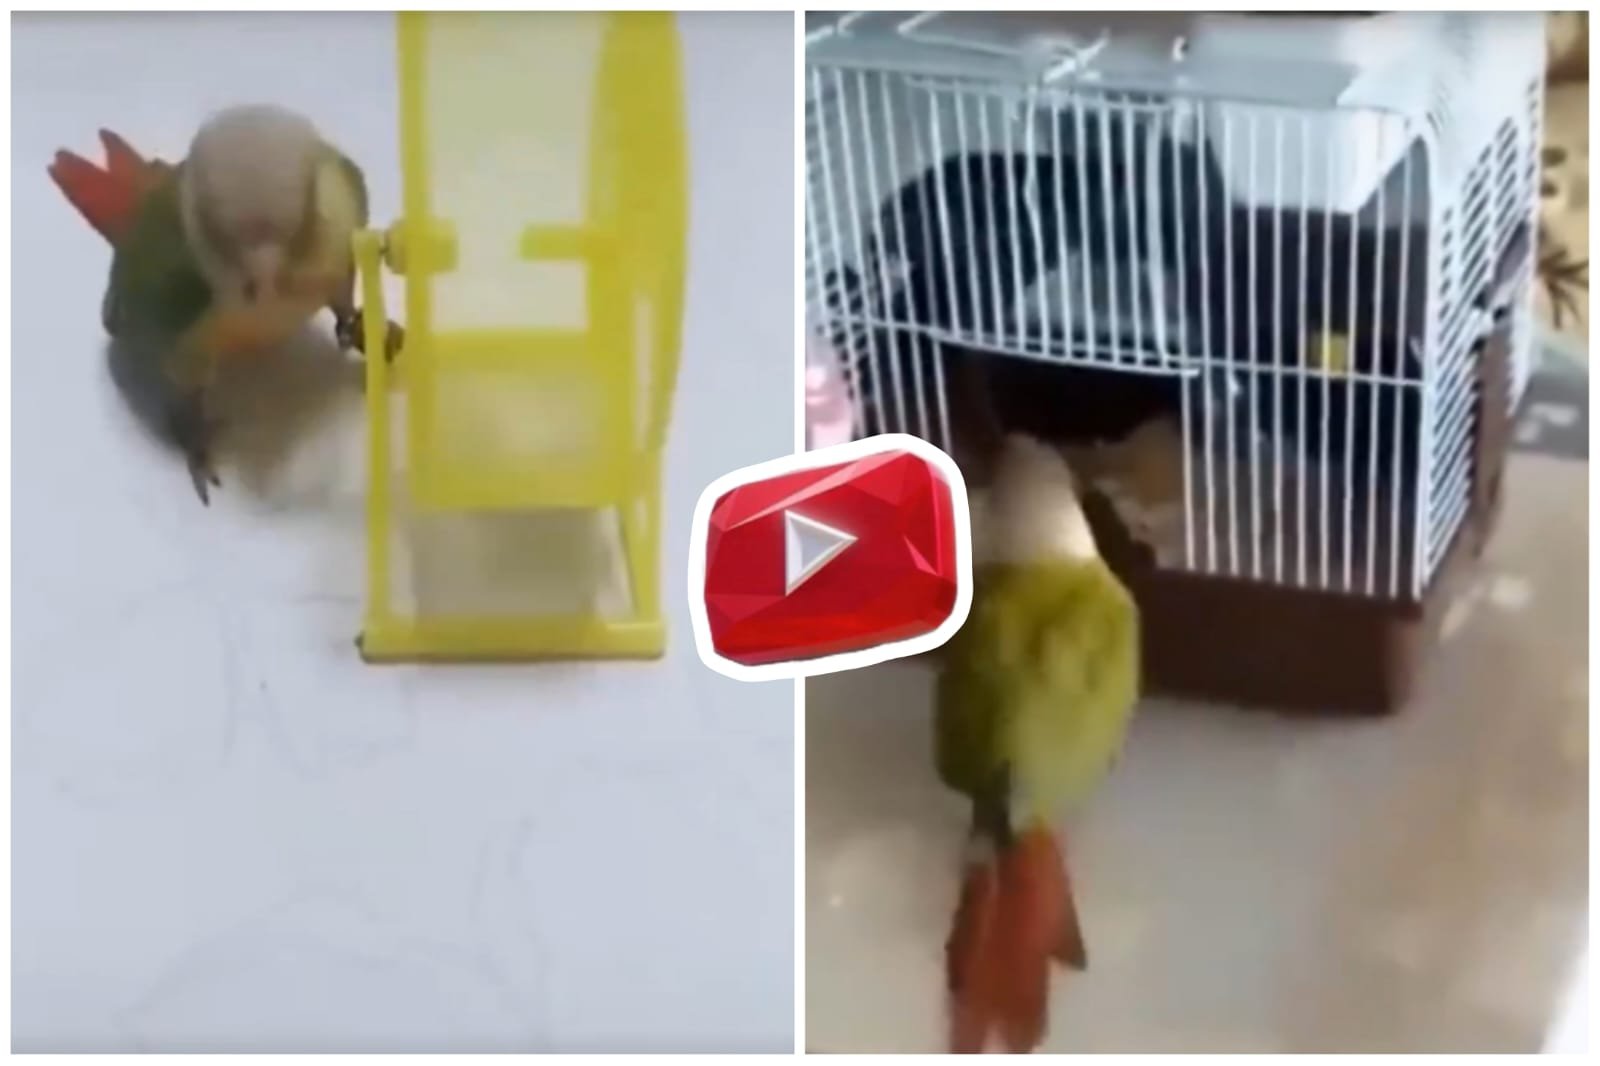 Parrot and Rat | First made the rat rotate in a circle, then locked it in the cage